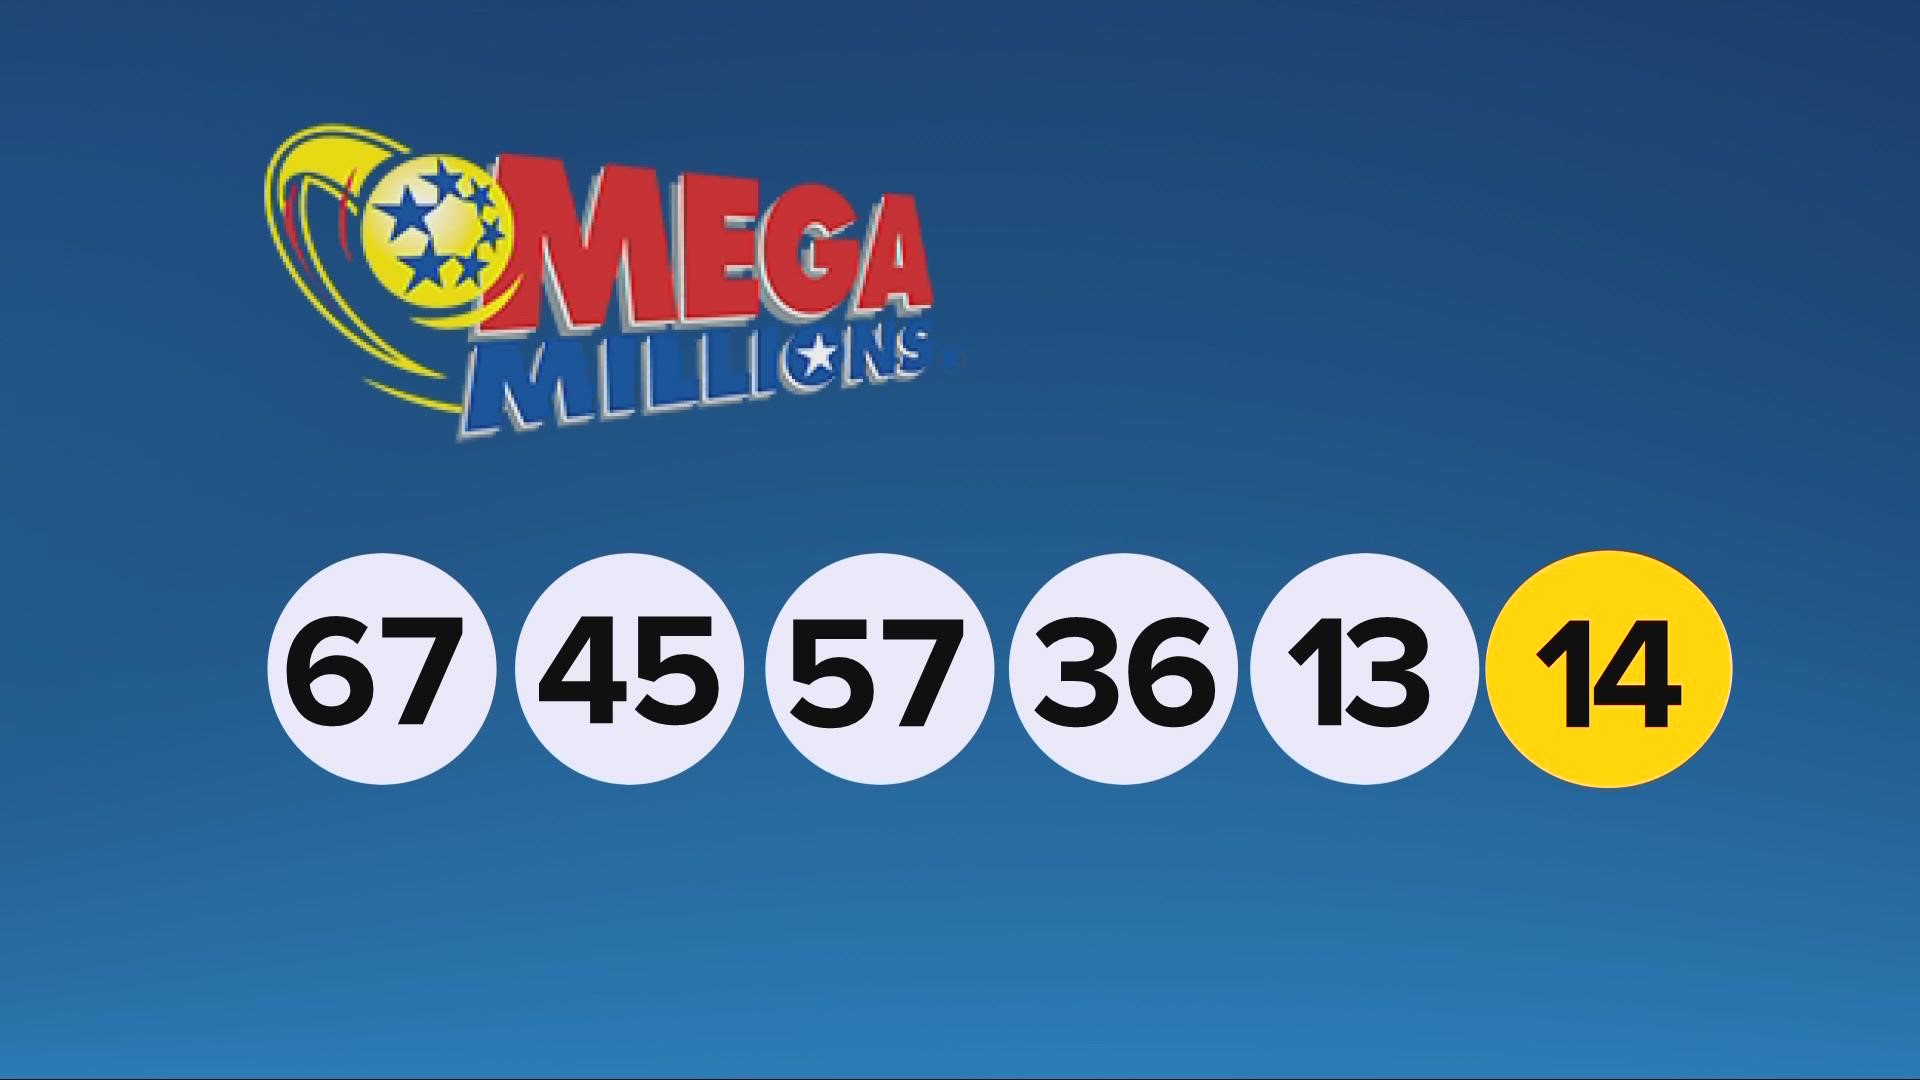 After months without a Mega Millions jackpot winner, someone won the big prize in Friday night's drawing.